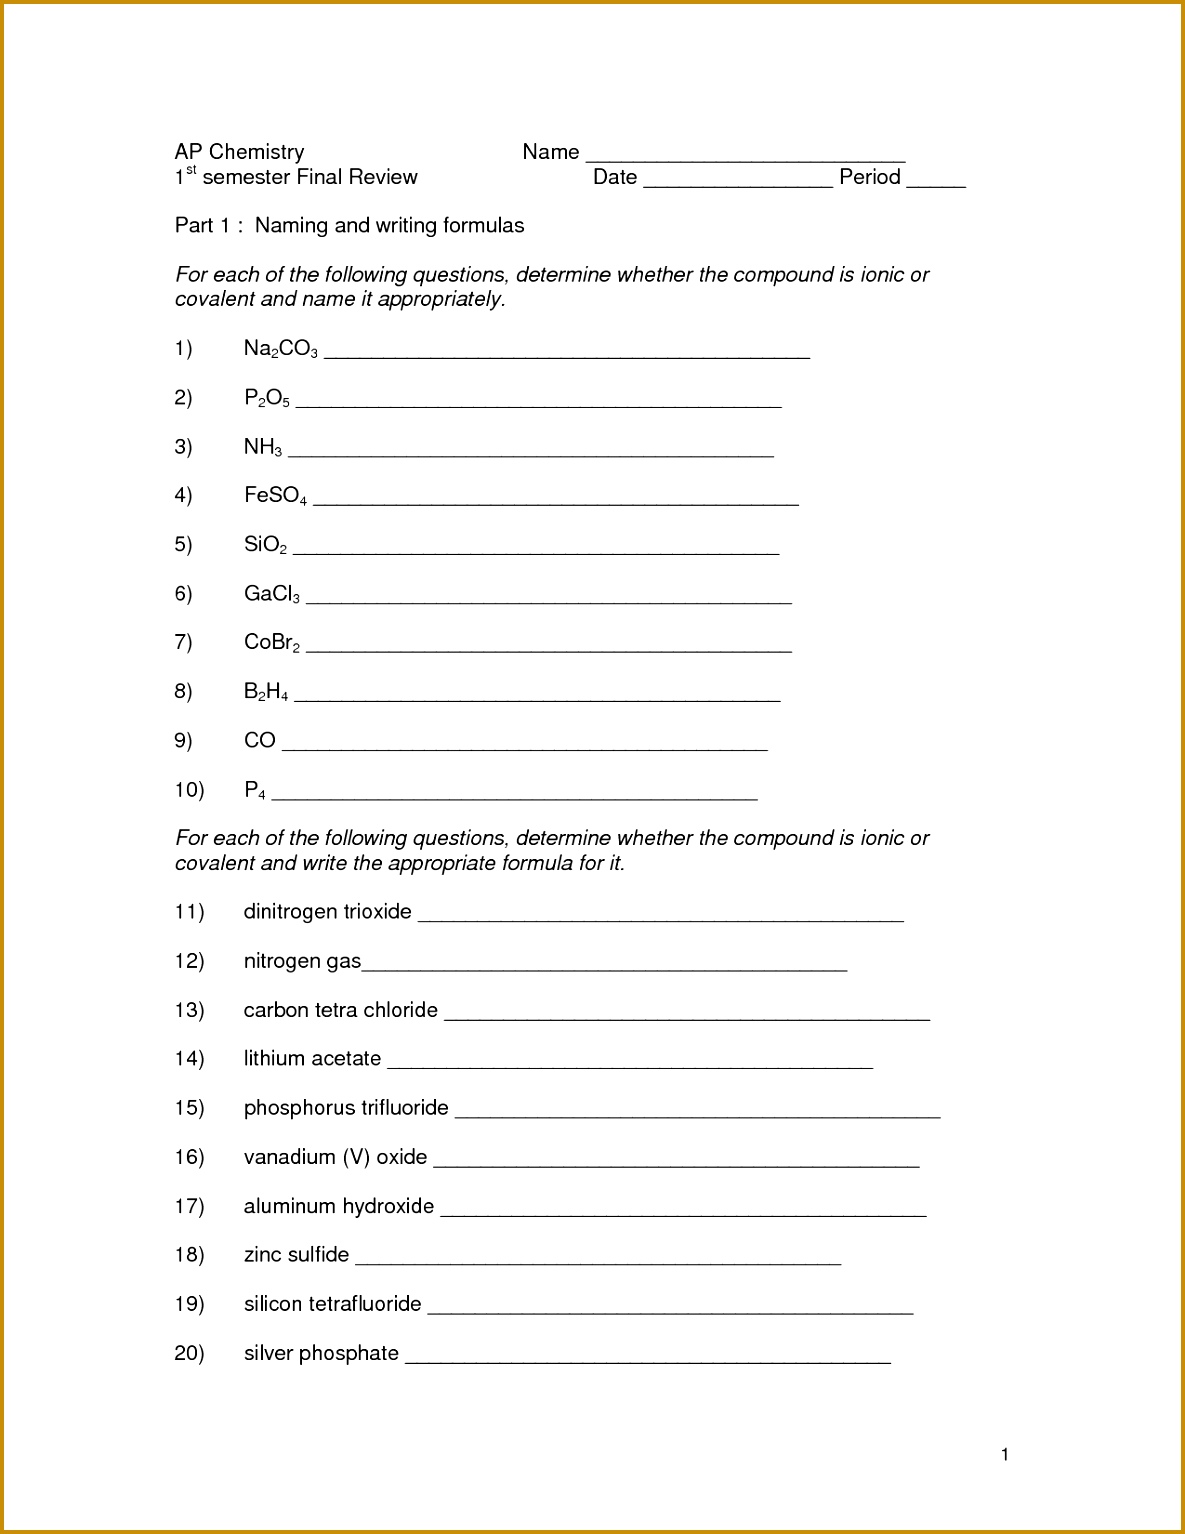 Worksheet Names Ionic pounds Lovely 29 Ionic and Covalent Bonding Worksheet Worksheet Naming Ionic 15341185